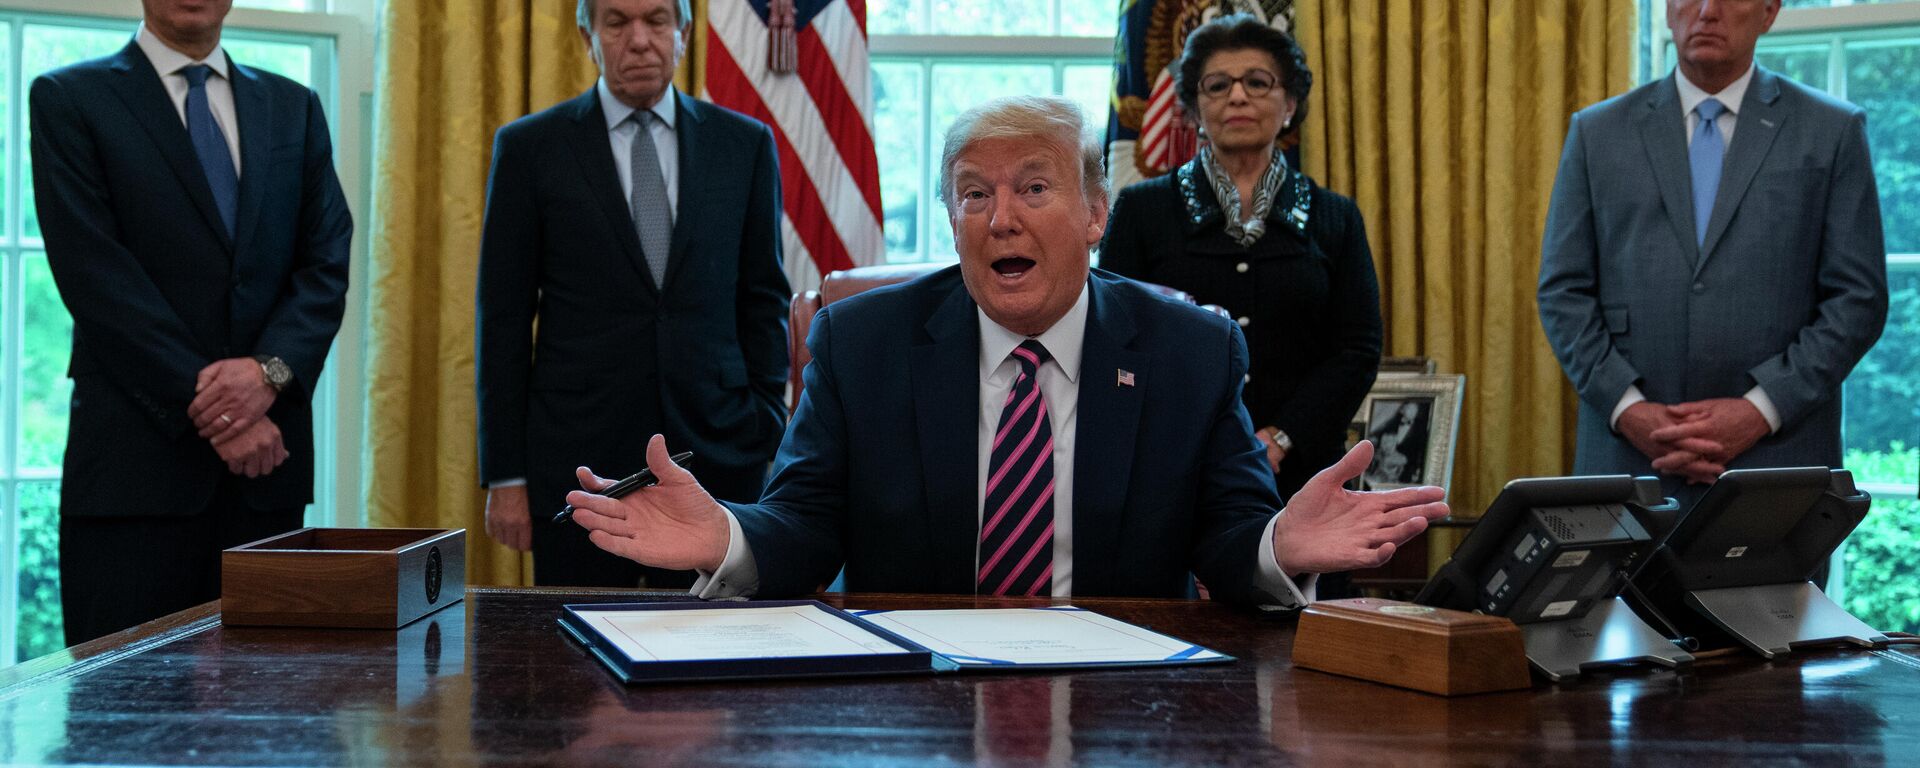 President Donald Trump speaks before signing a coronavirus aid package to direct funds to small businesses, hospitals, and testing, in the Oval Office of the White House, Friday, April 24, 2020, in Washington. From left, Treasury Secretary Steven Mnuchin, Sen. Roy Blunt, R-Mo., Trump, Small Business administrator Jovita Carranza, and House Minority Leader Kevin McCarthy of Calif. (AP Photo/Evan Vucci) - Sputnik International, 1920, 09.06.2023